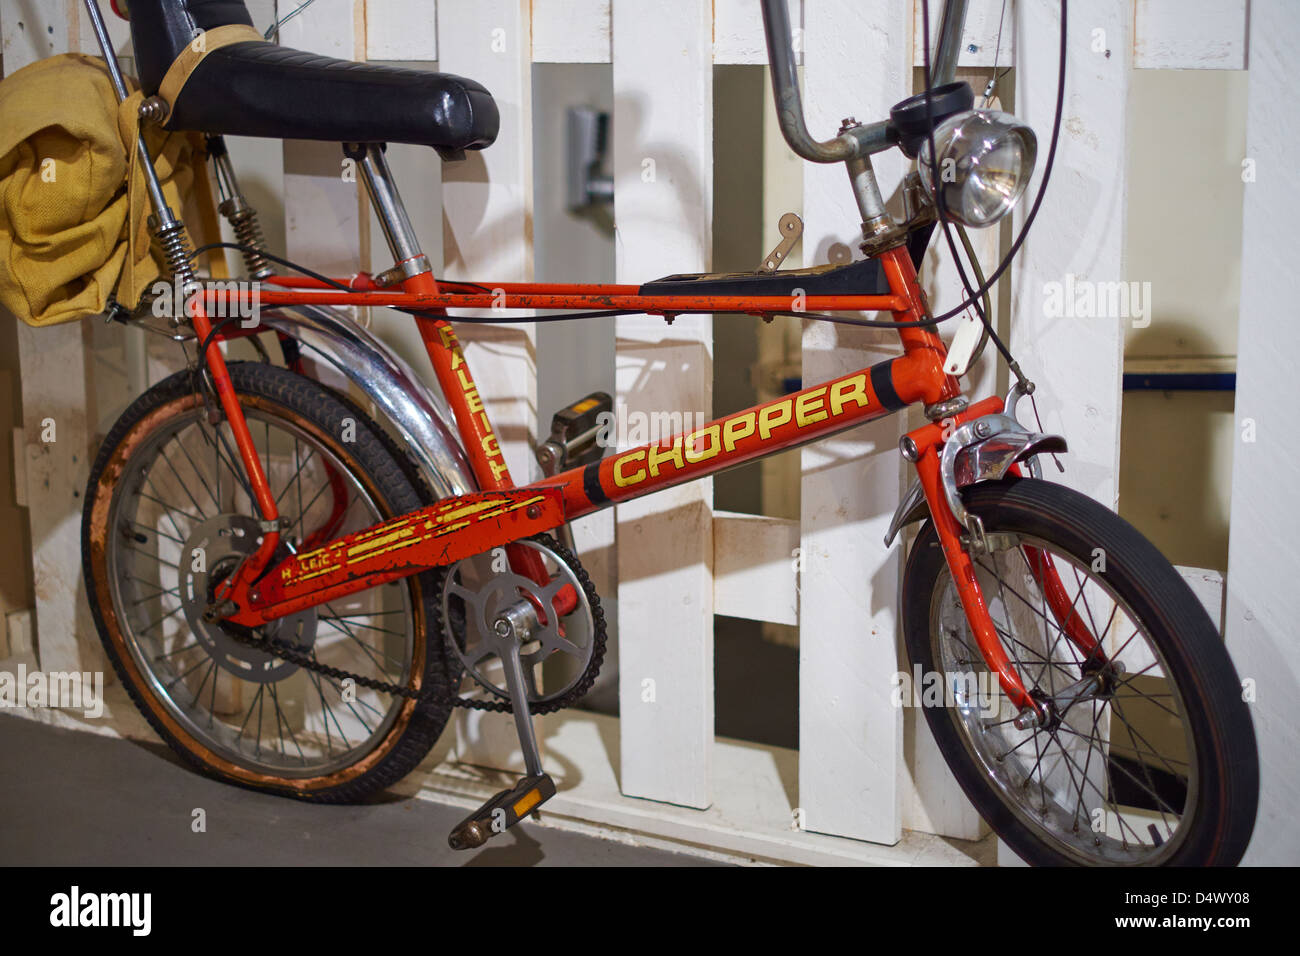 Raleigh Chopper bike UK Coventry Transport Museum Banque D'Images